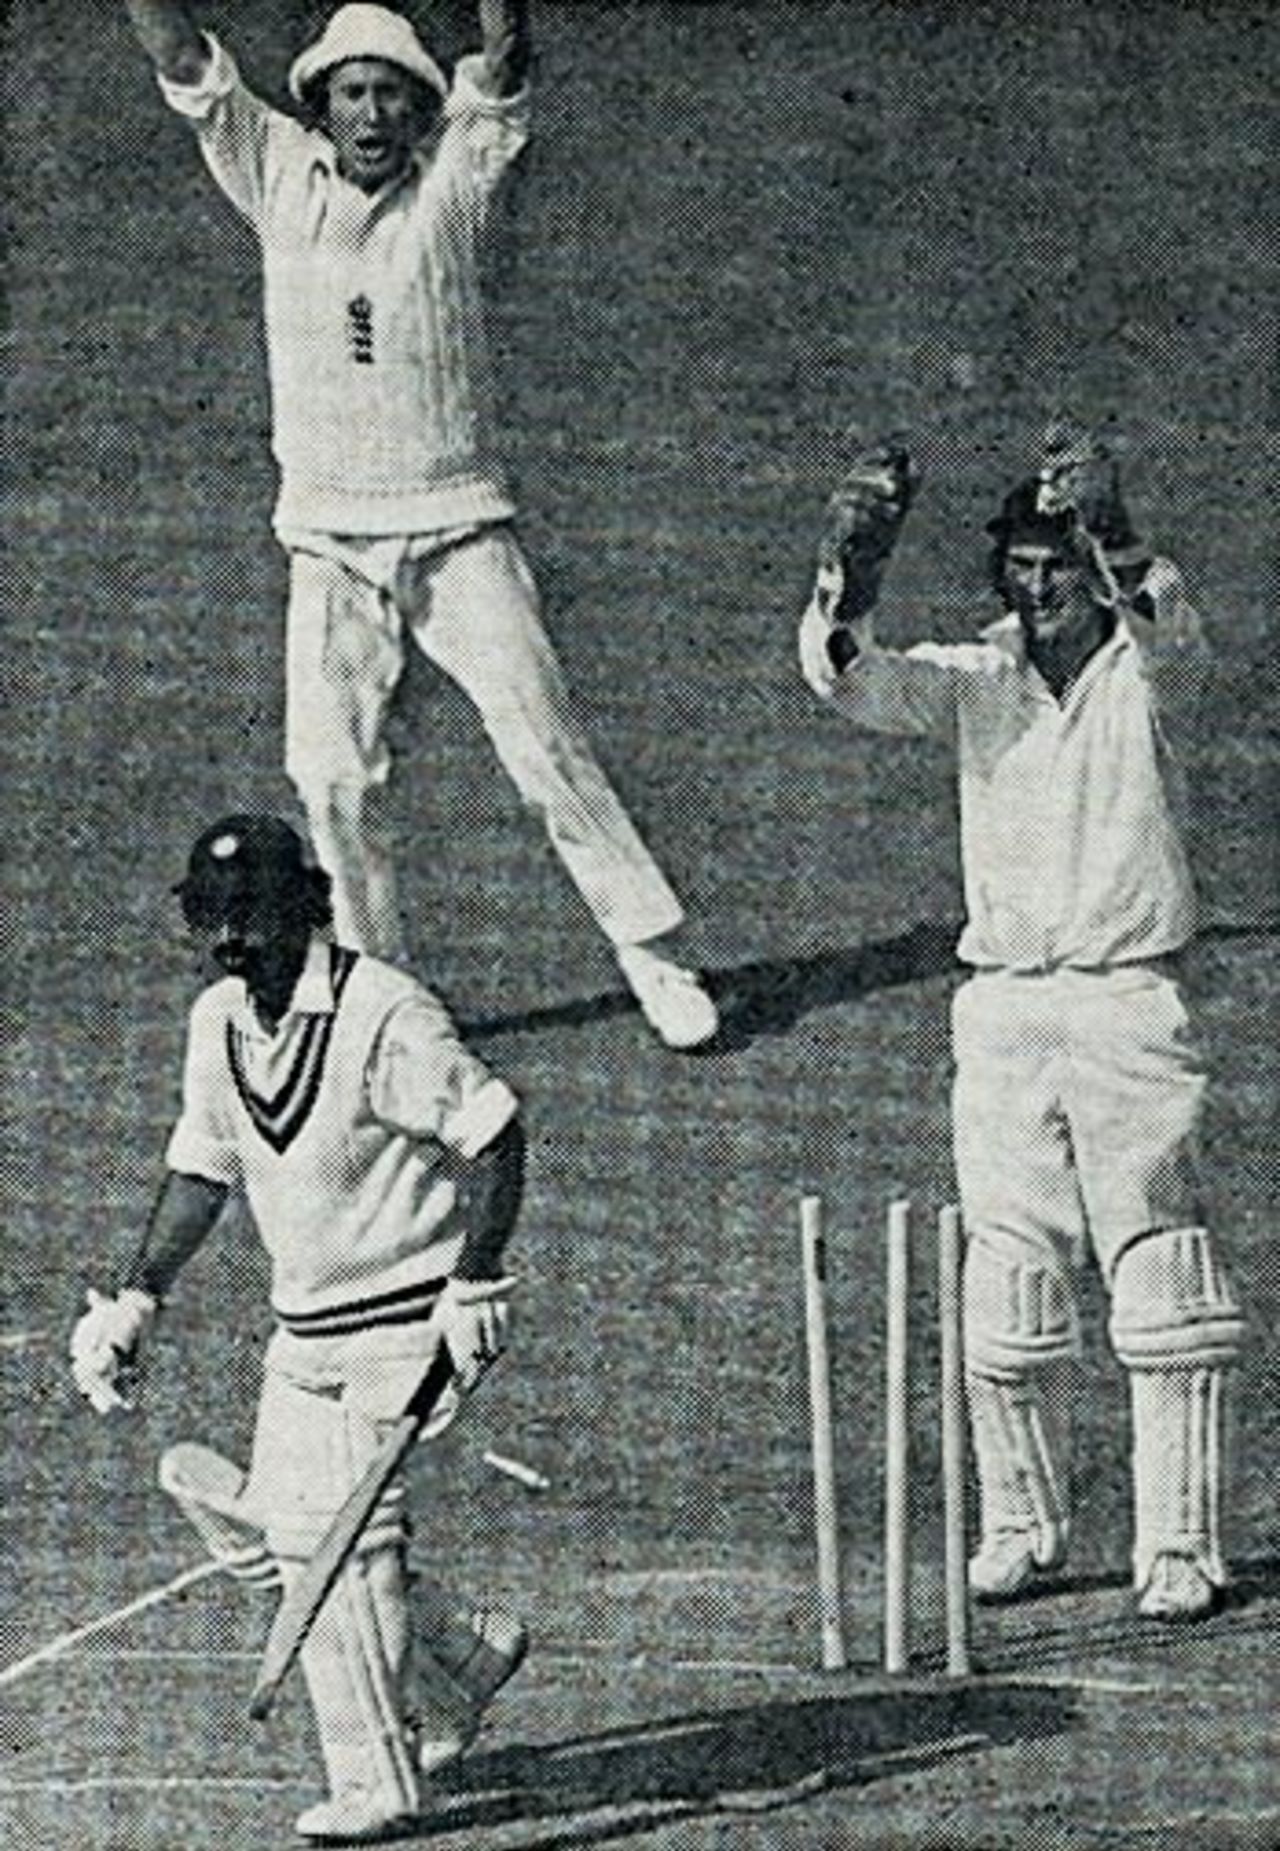 Gundappa Viswanath bowled by Underwood for 52, England v India, 2nd Test, Lord's, June 22, 1974